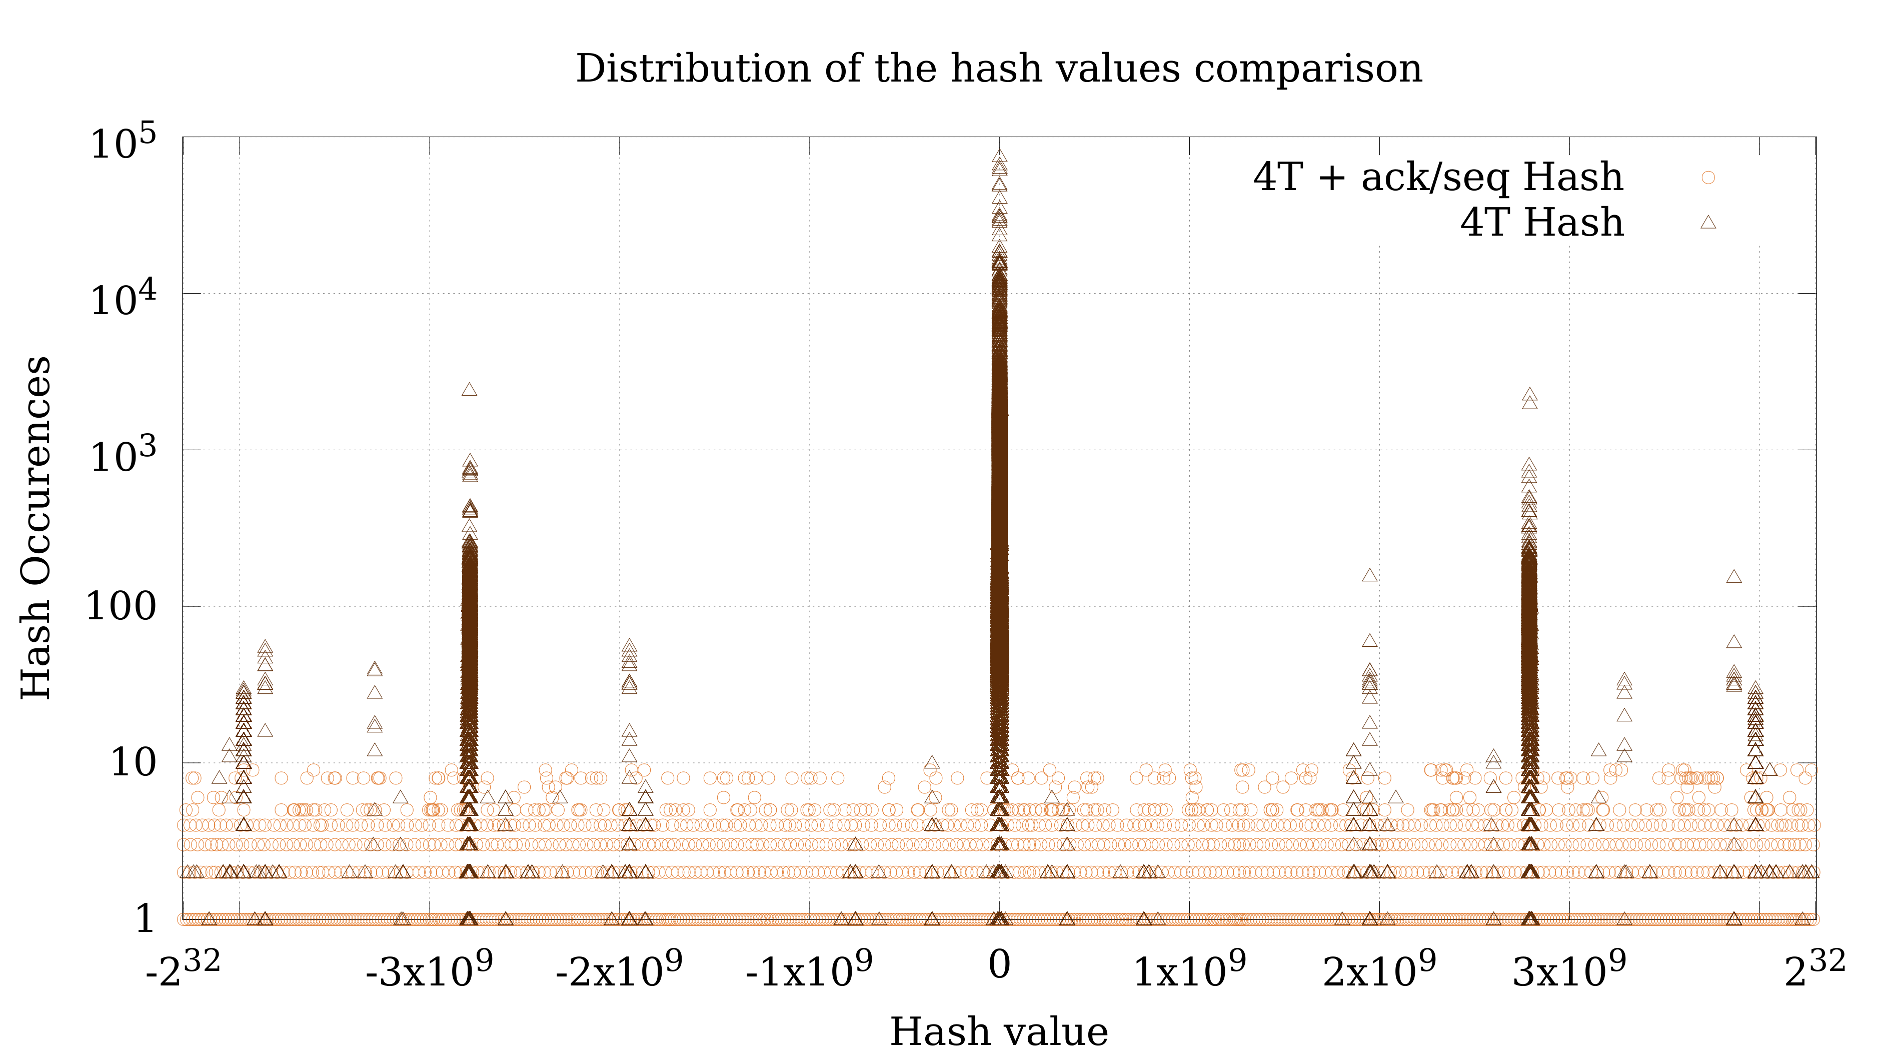 Comparison of the distribution of the packets using different hash functions